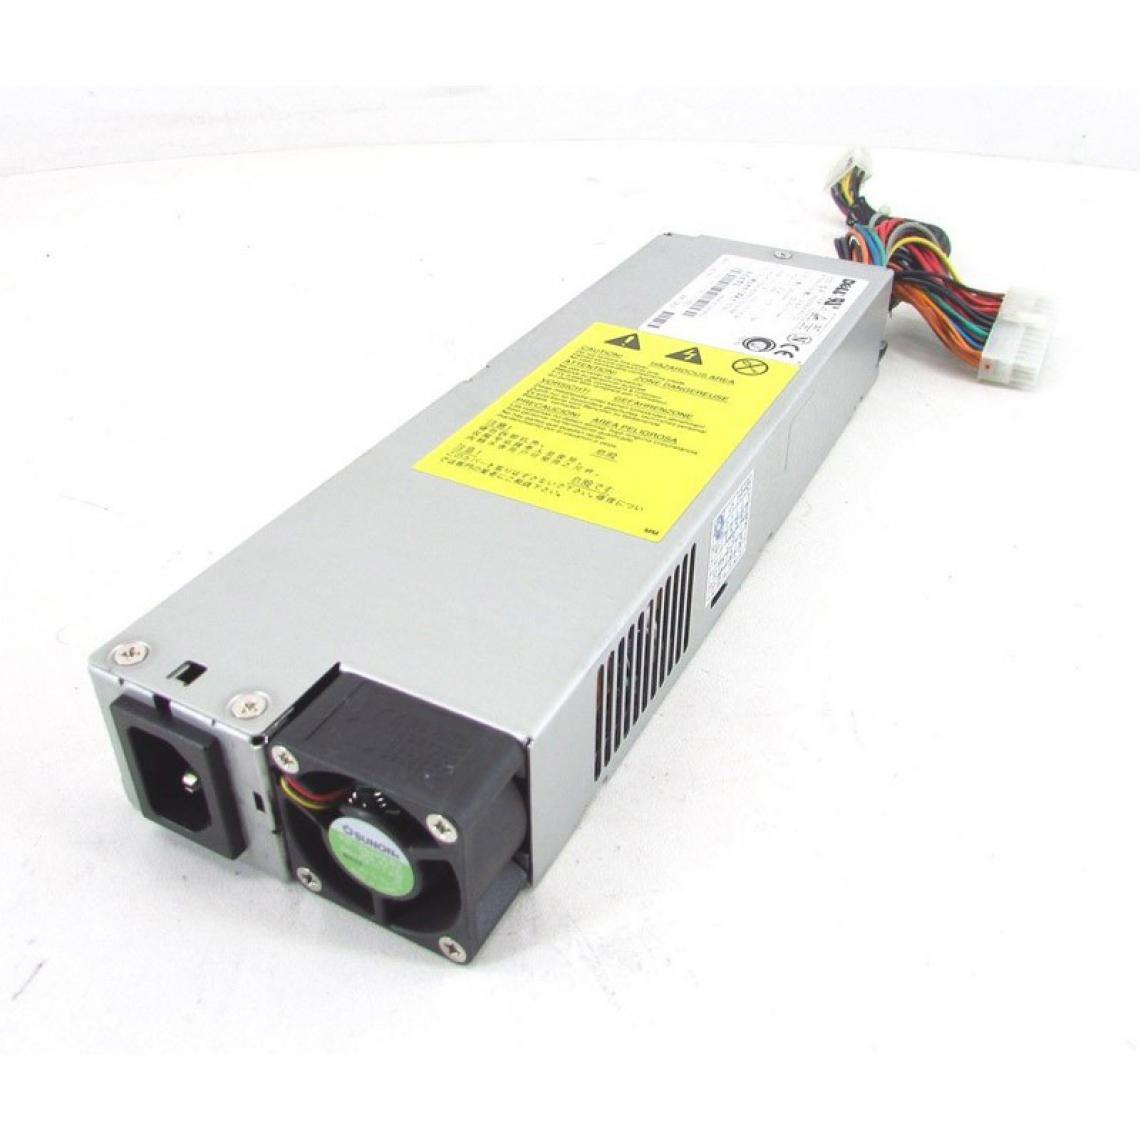 Dell - Alimentation PC Dell DPS-202AB A 240W 011KVW DELL Power Supply PowerEdge 1550 - Alimentation modulaire